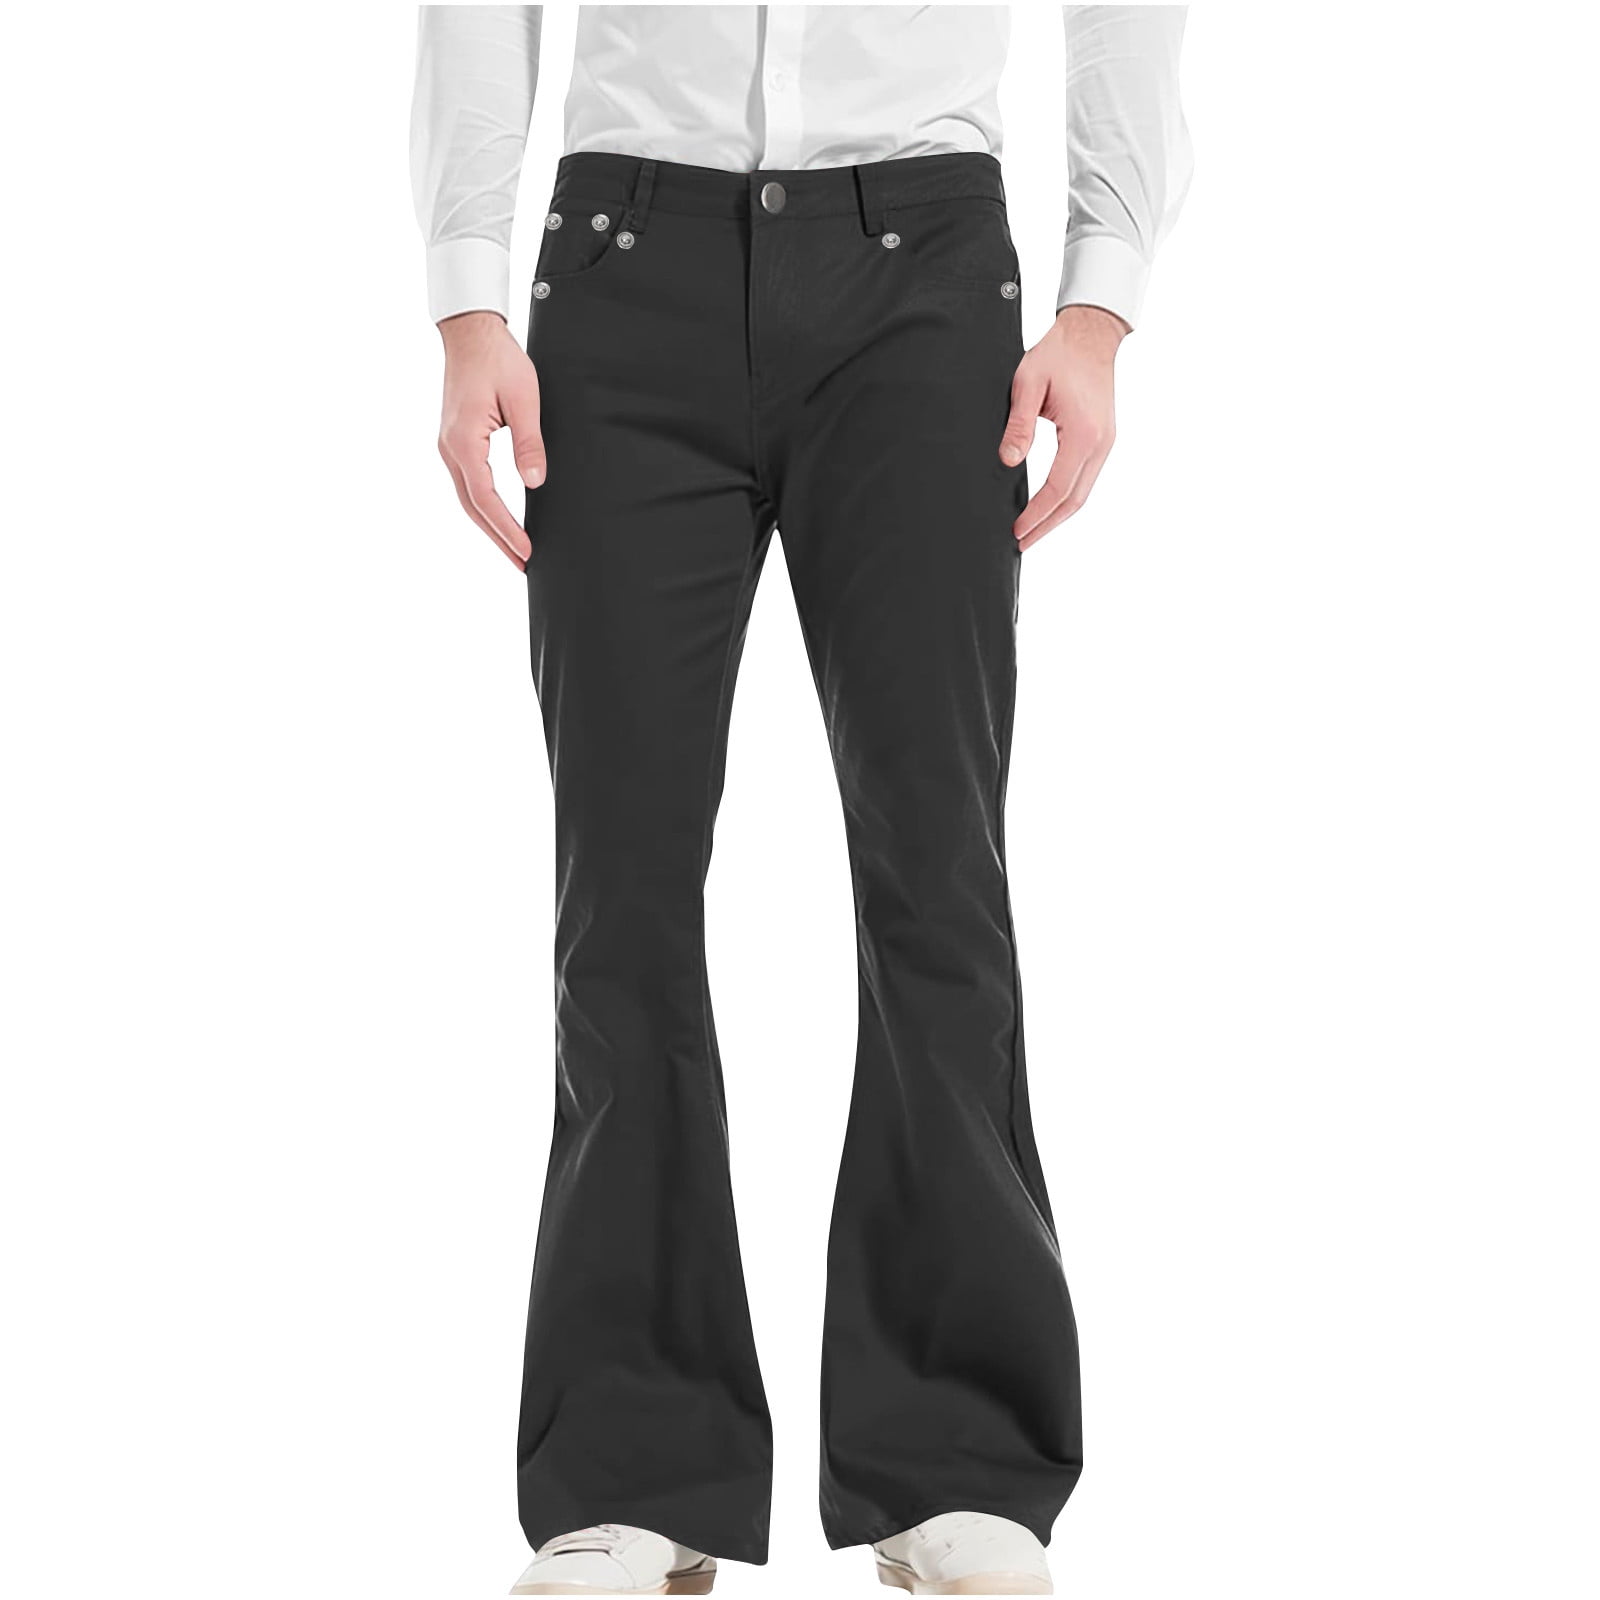 Mens Flared Bell Bottom Dress Pants Stretch Business Trousers Bootcut  Formal